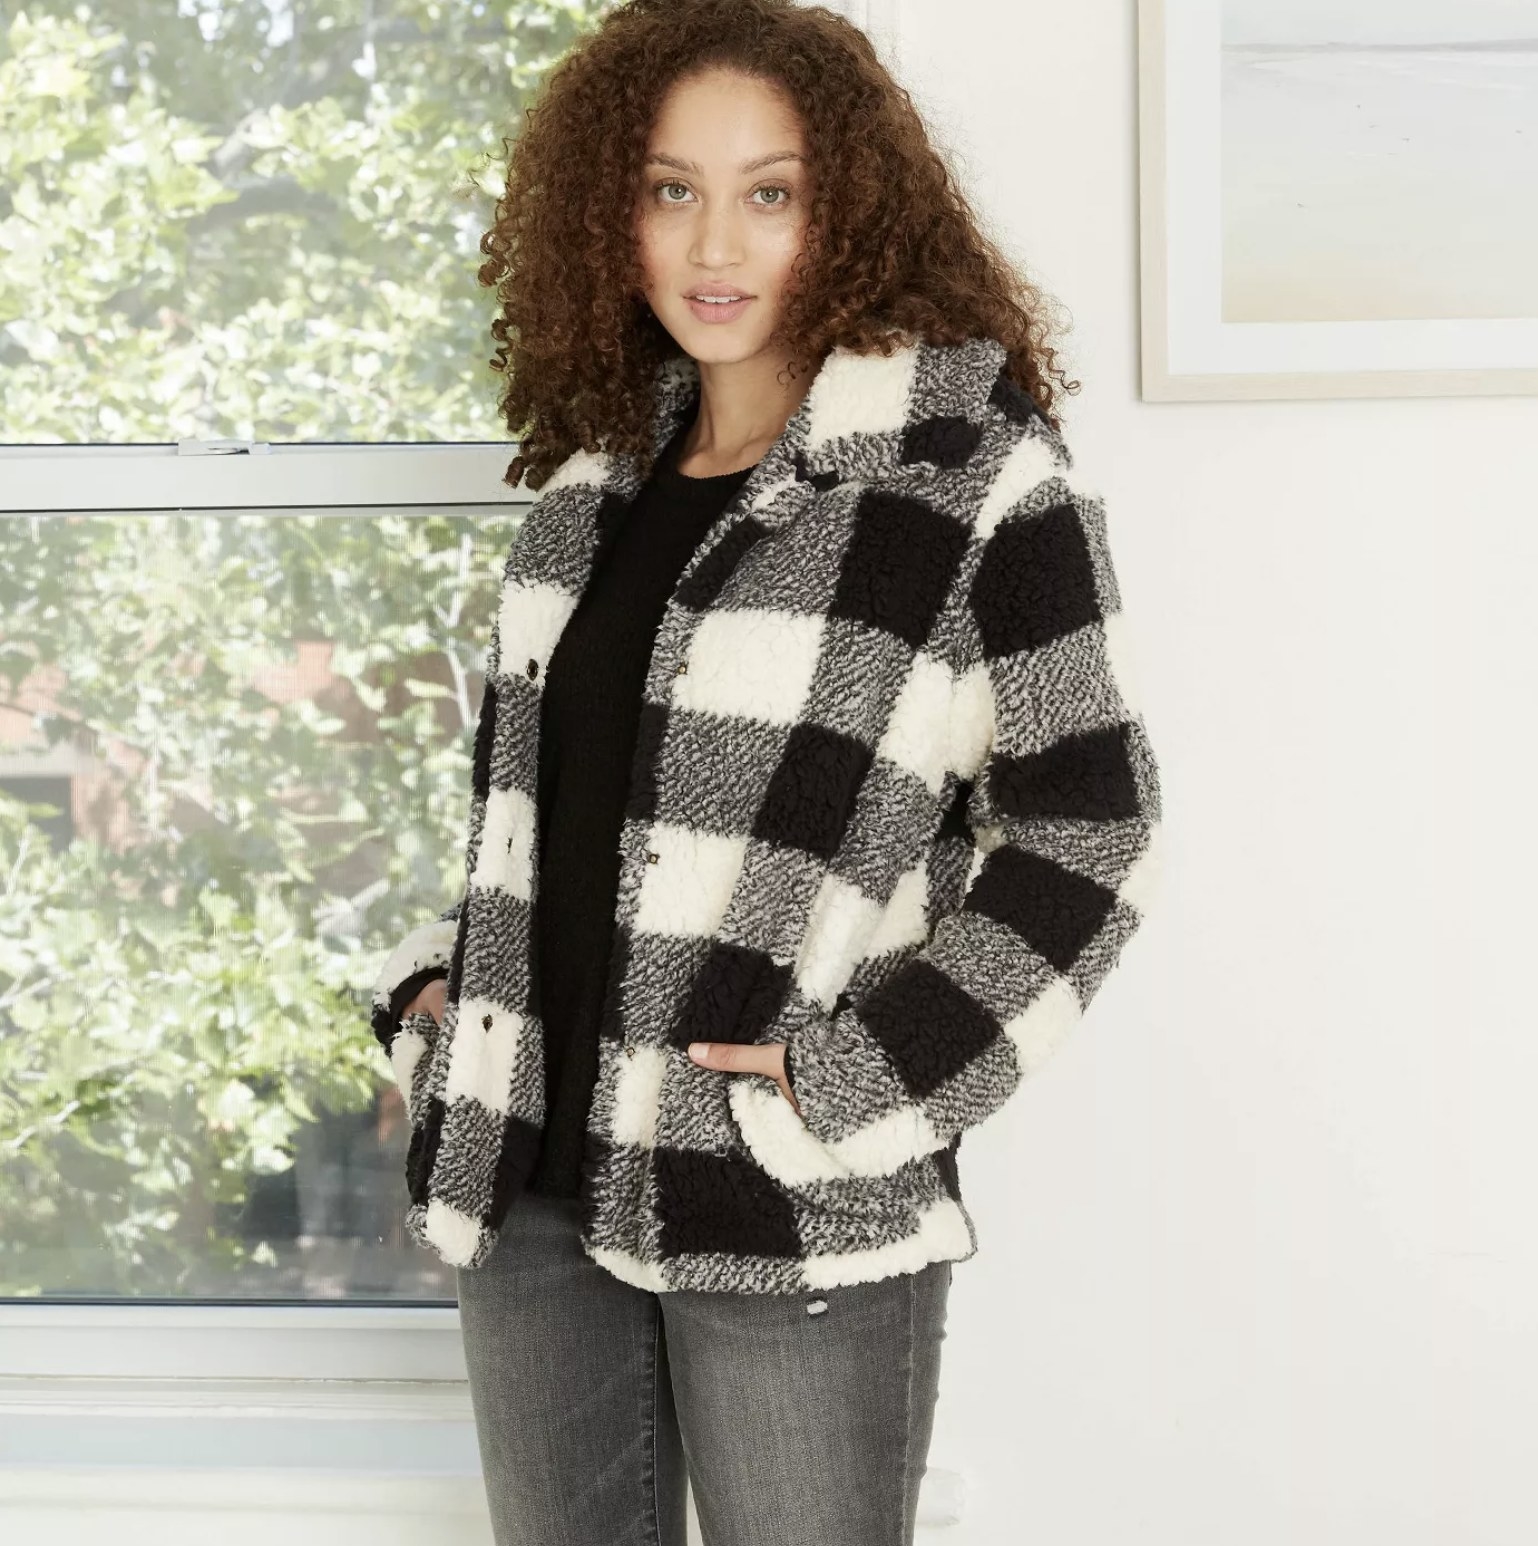 Model is wearing a black and white checkered jacket